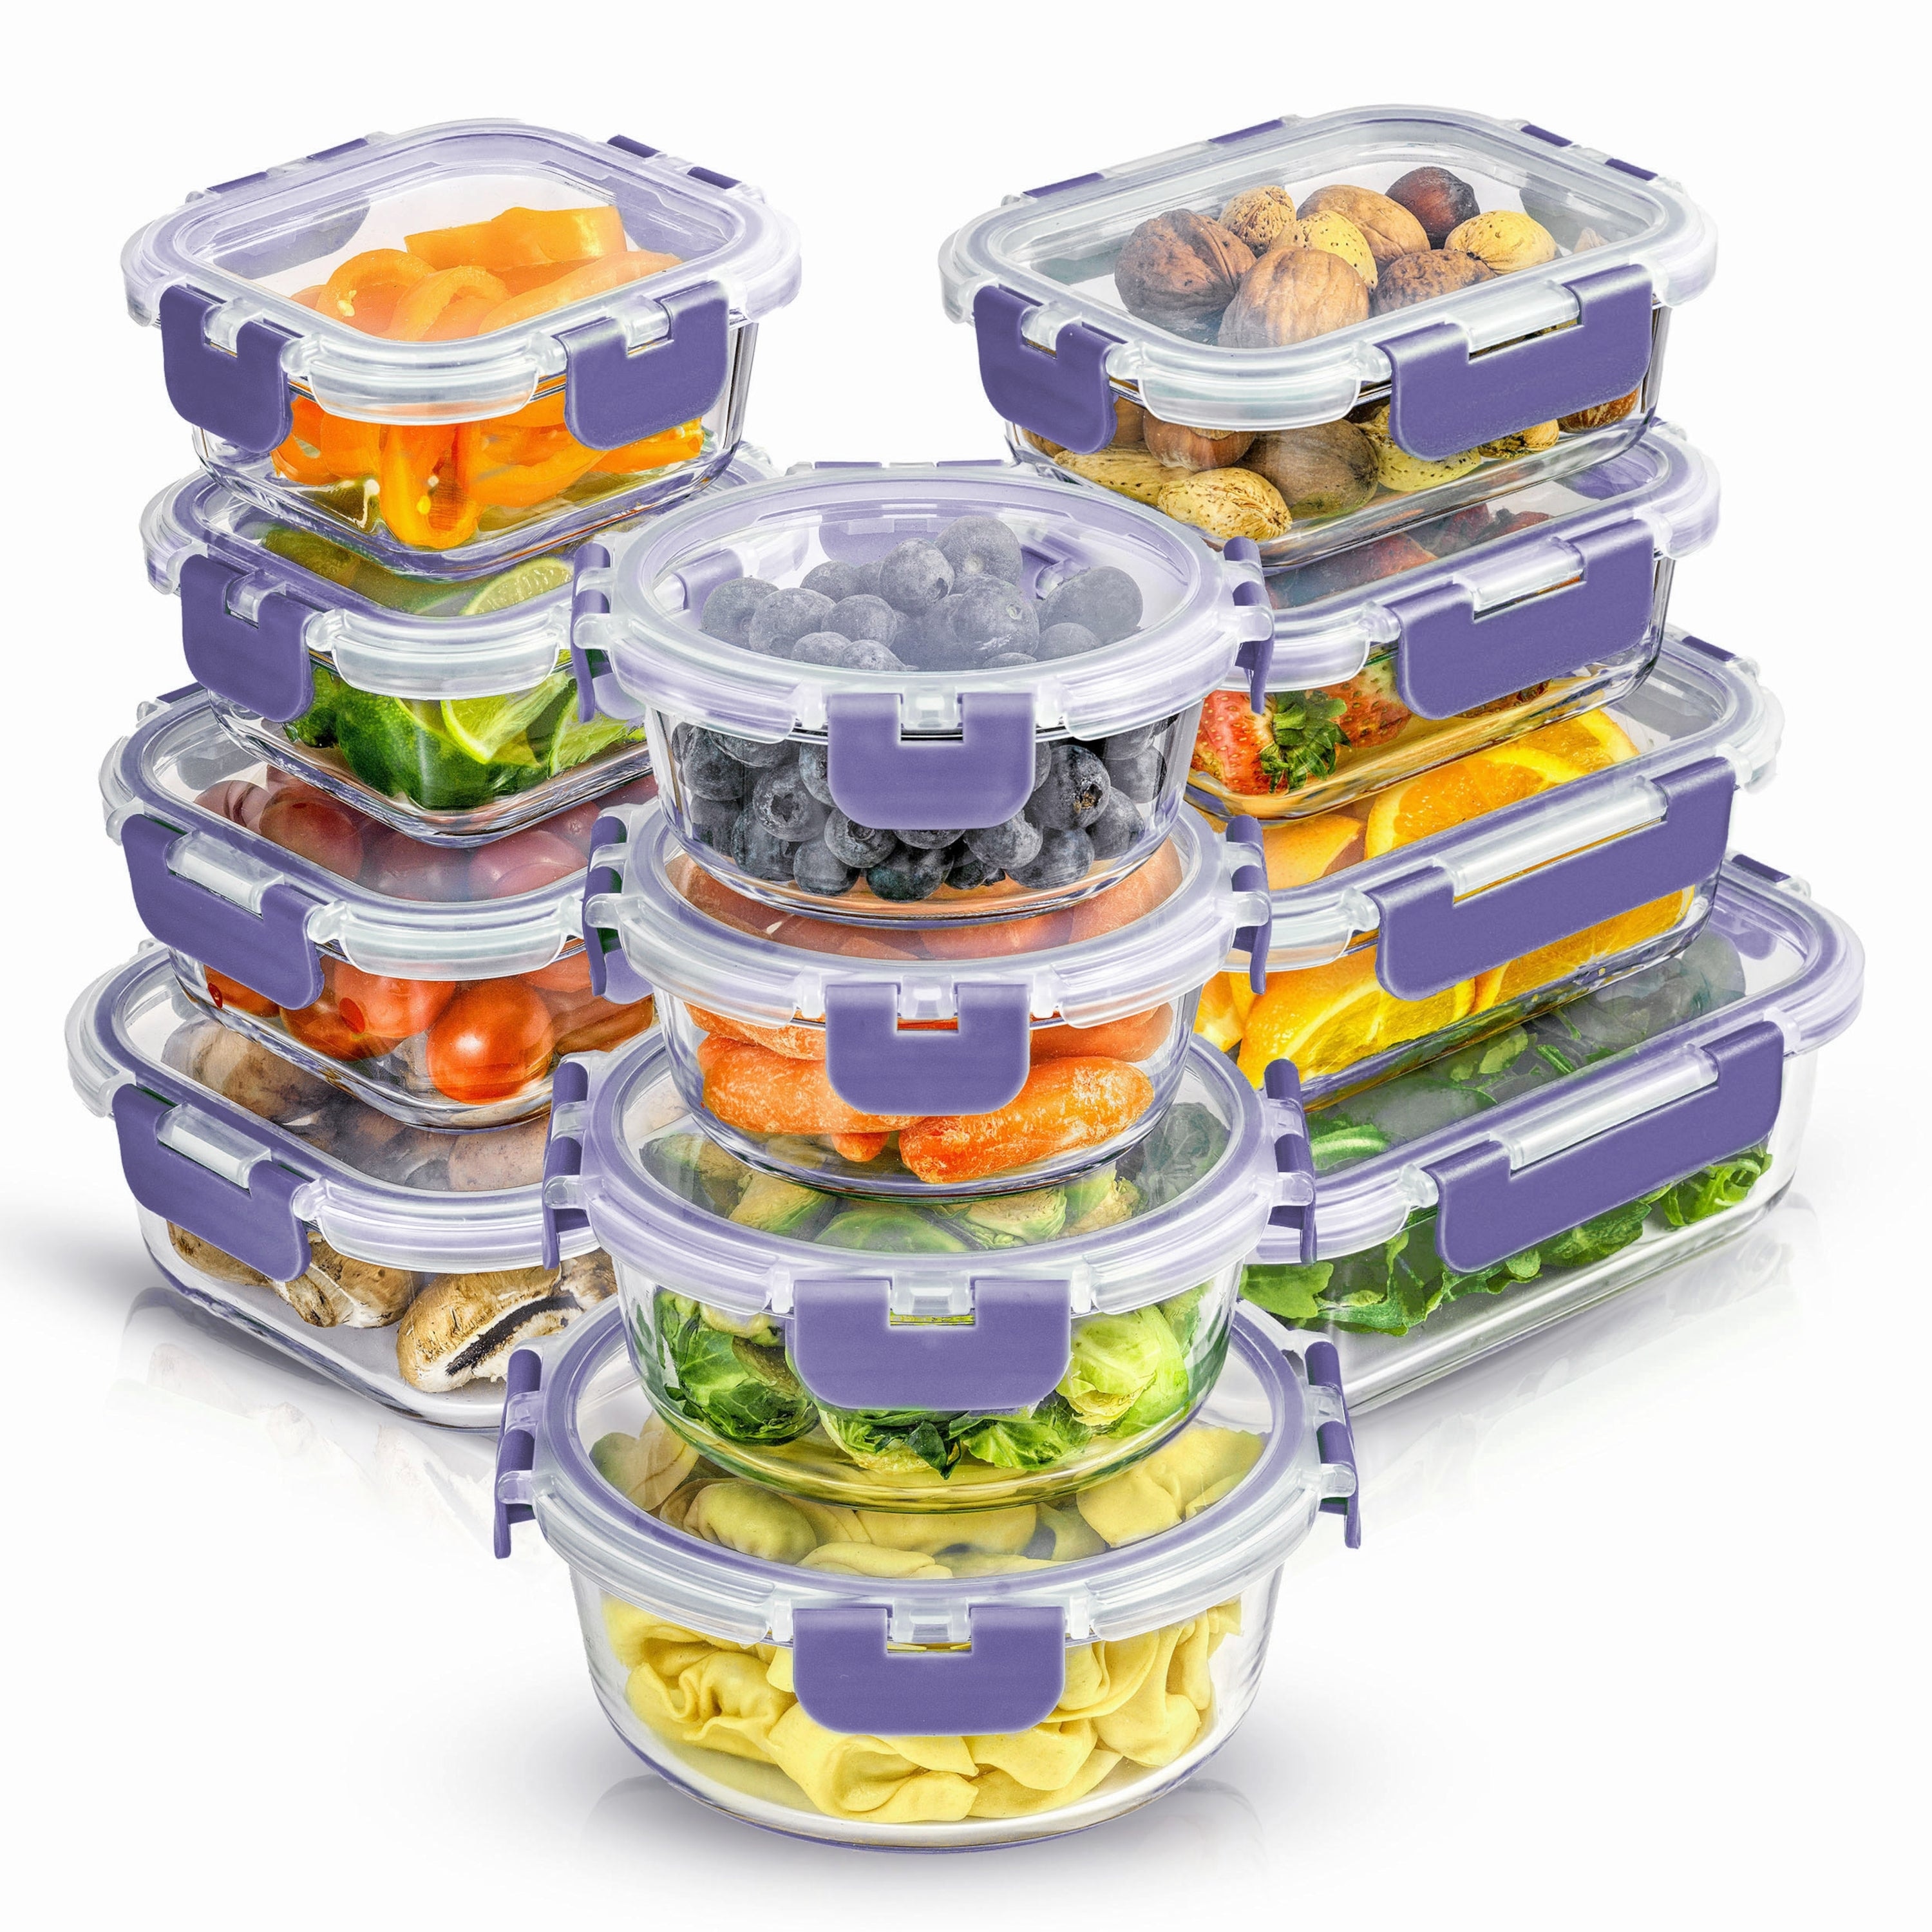 Easylock Microwavable Glass Food Containers With Dividers